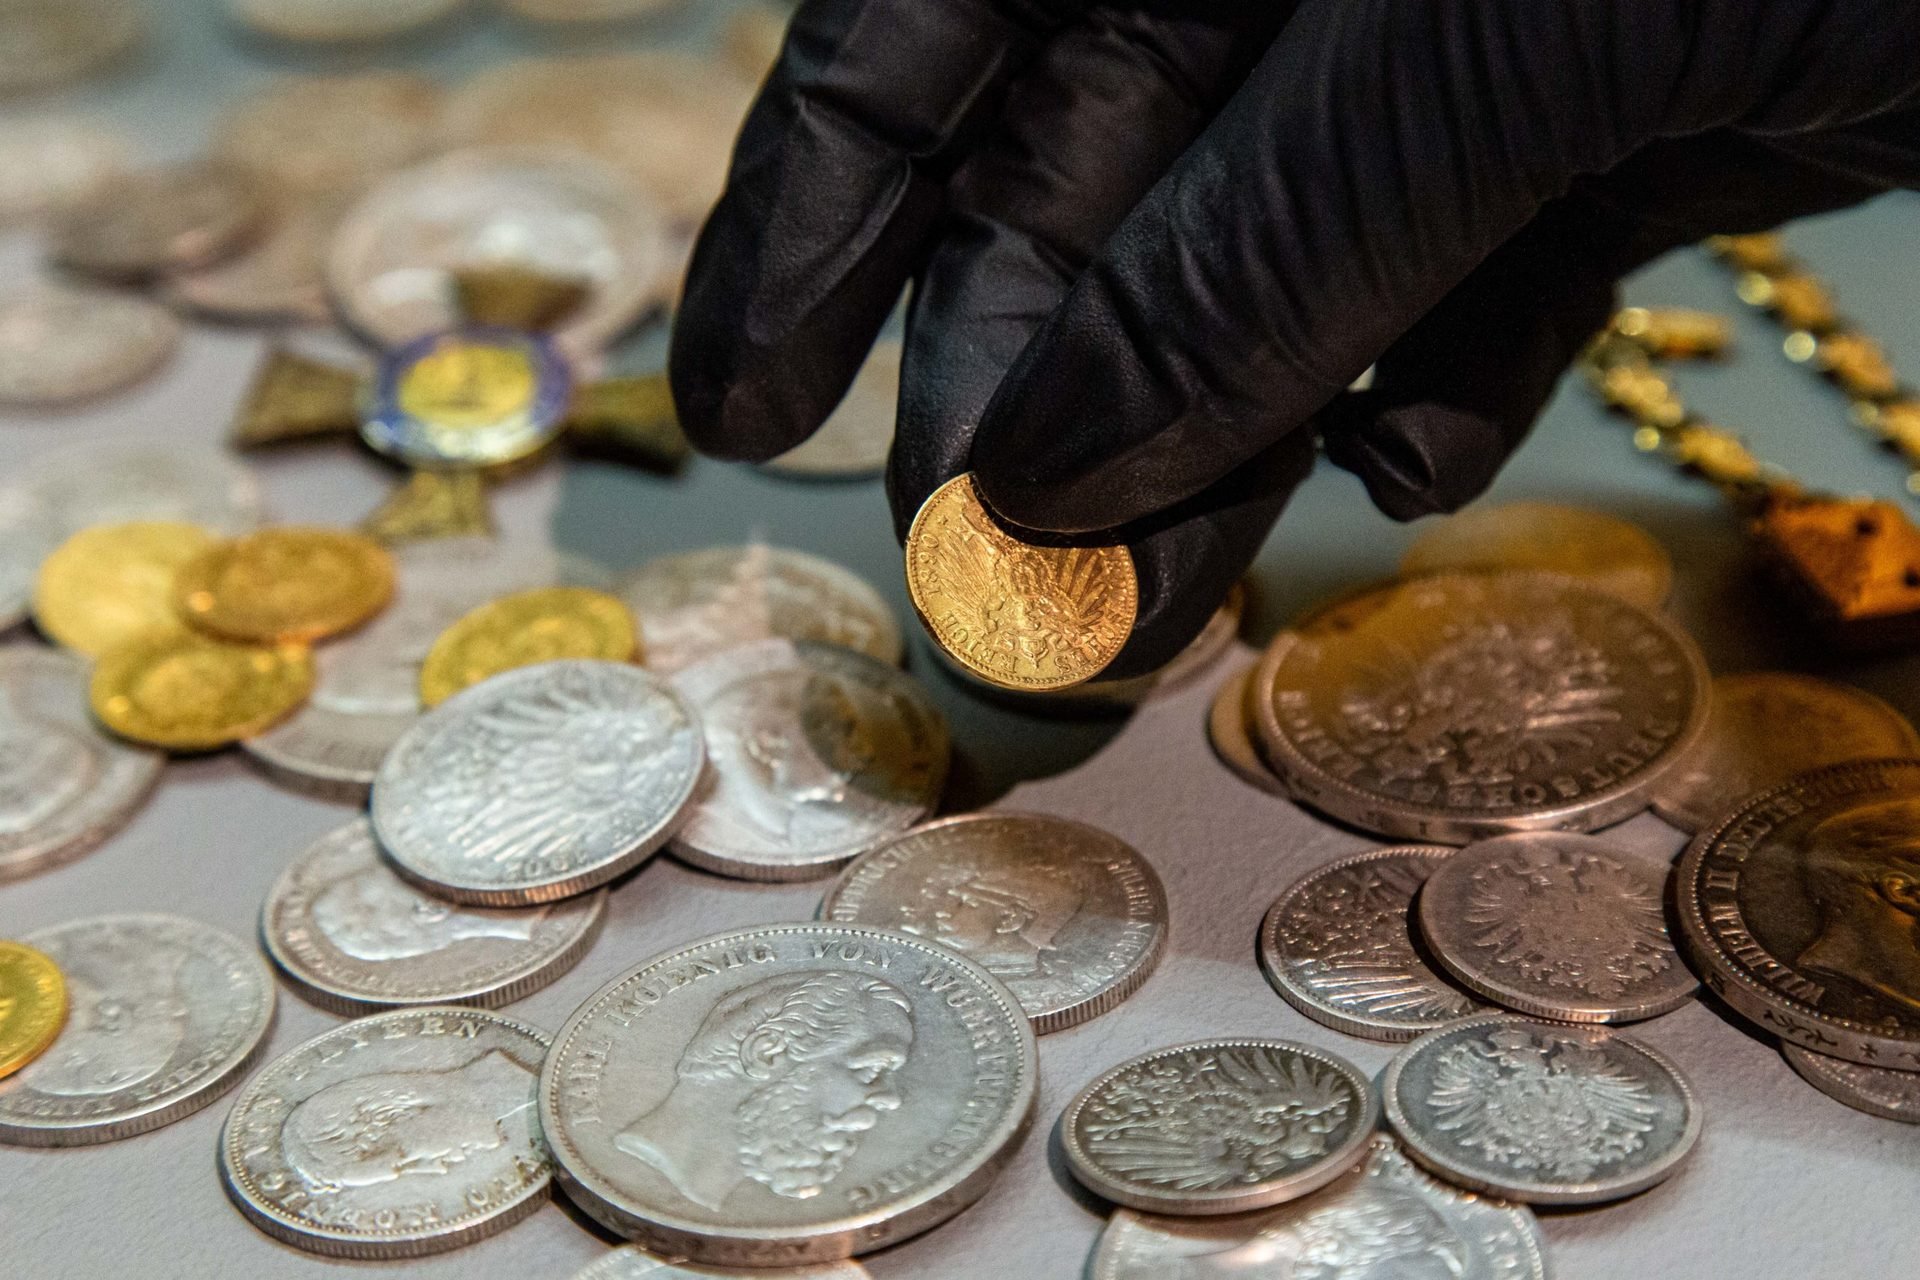 Aukšvilkii's treasure. It consists of - German silver and gold coins, an order, two gold wedding rings, a watch (Photo. Laima Penek, LNM photo)